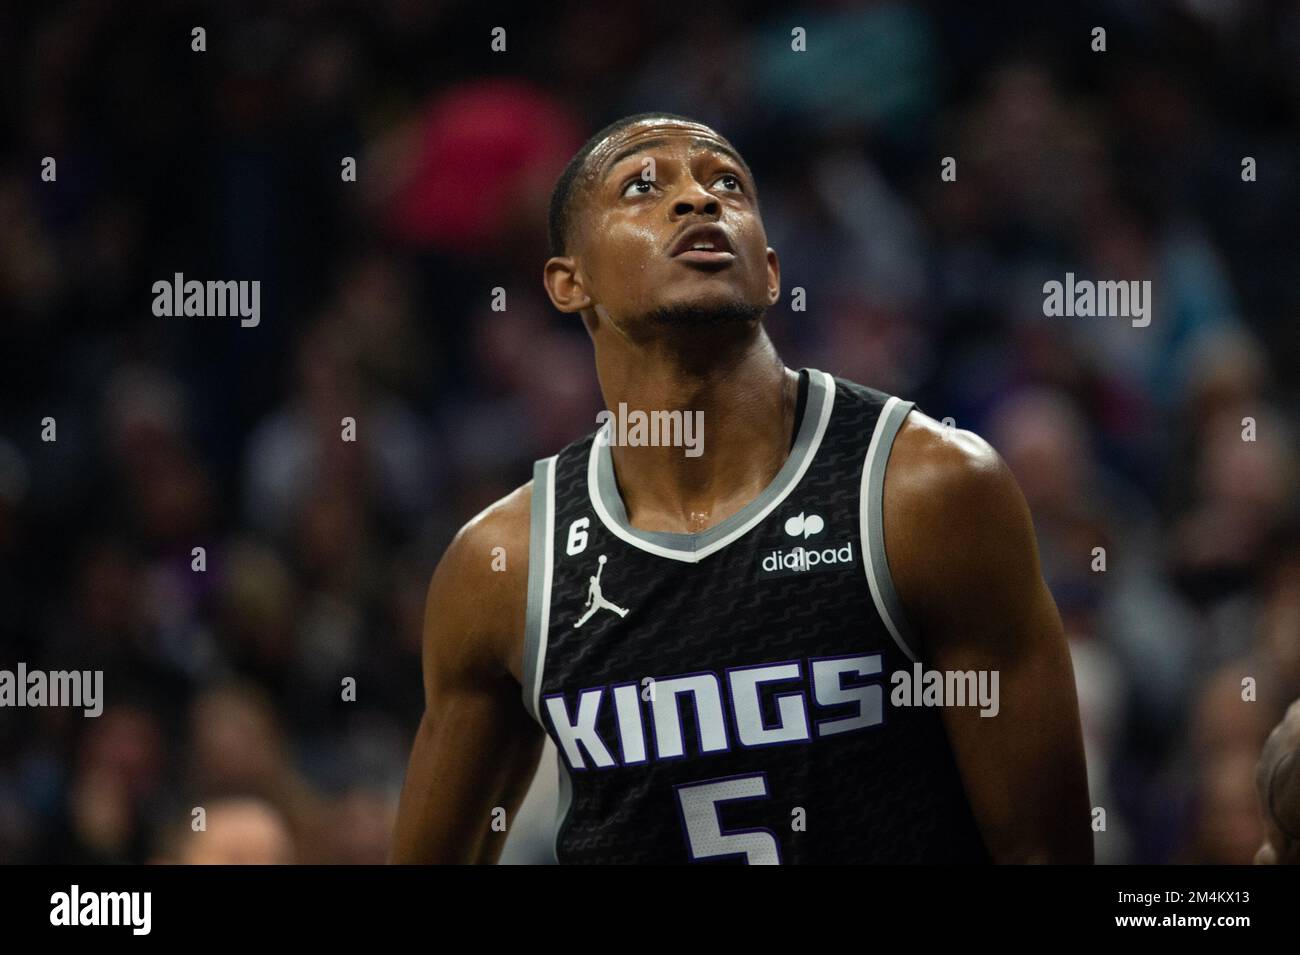 Sacramento, CA, USA. 21st Dec, 2022. Sacramento Kings center Neemias Queta  (88) scores a basket in the first half against the Los Angeles Lakers  during a game at Golden 1 Center in